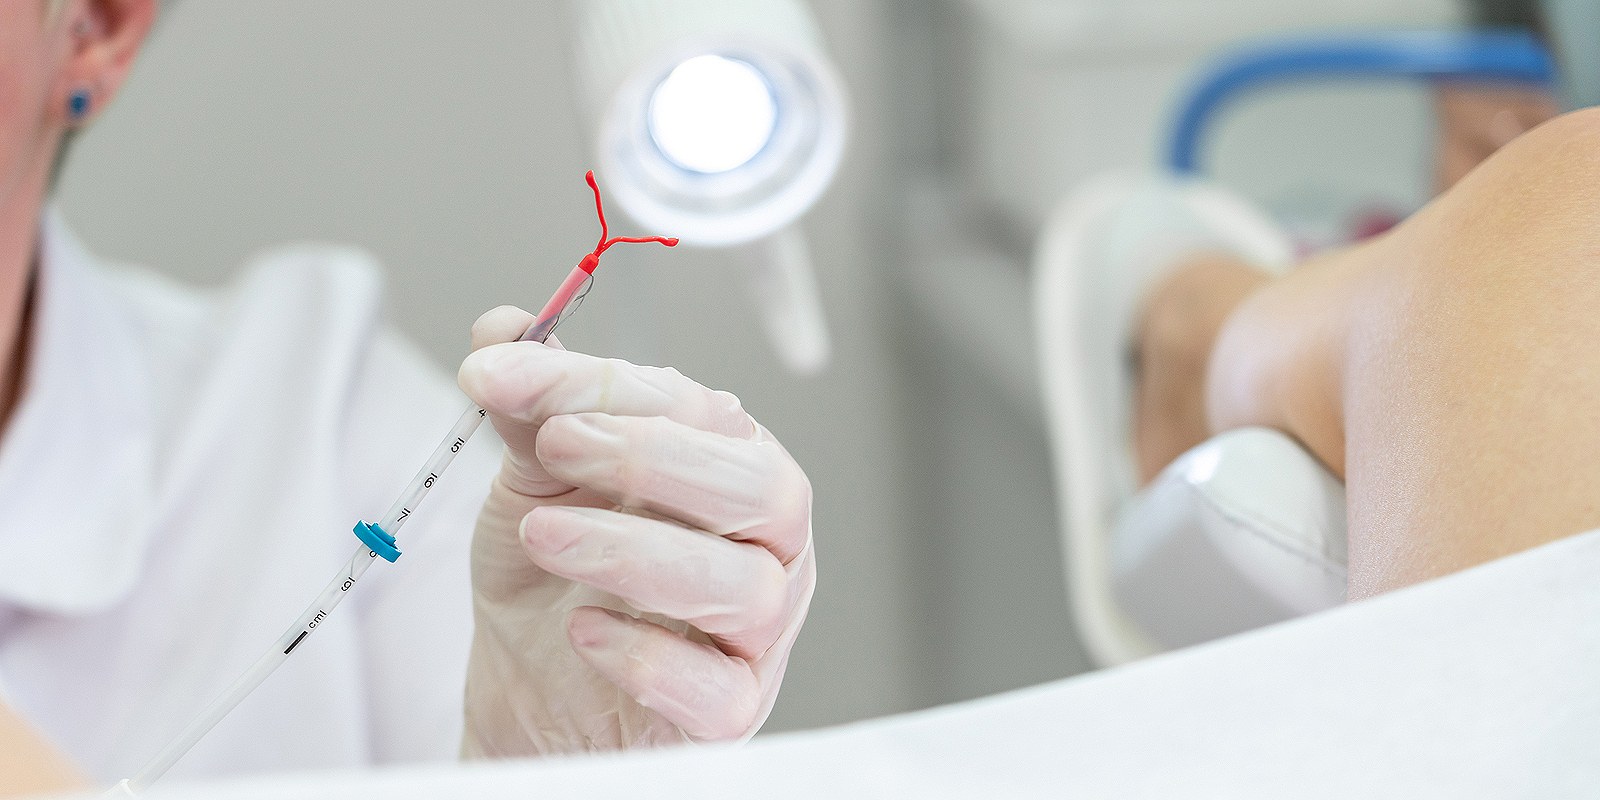 A Gynecologist is preparing to place an IUD on a patient